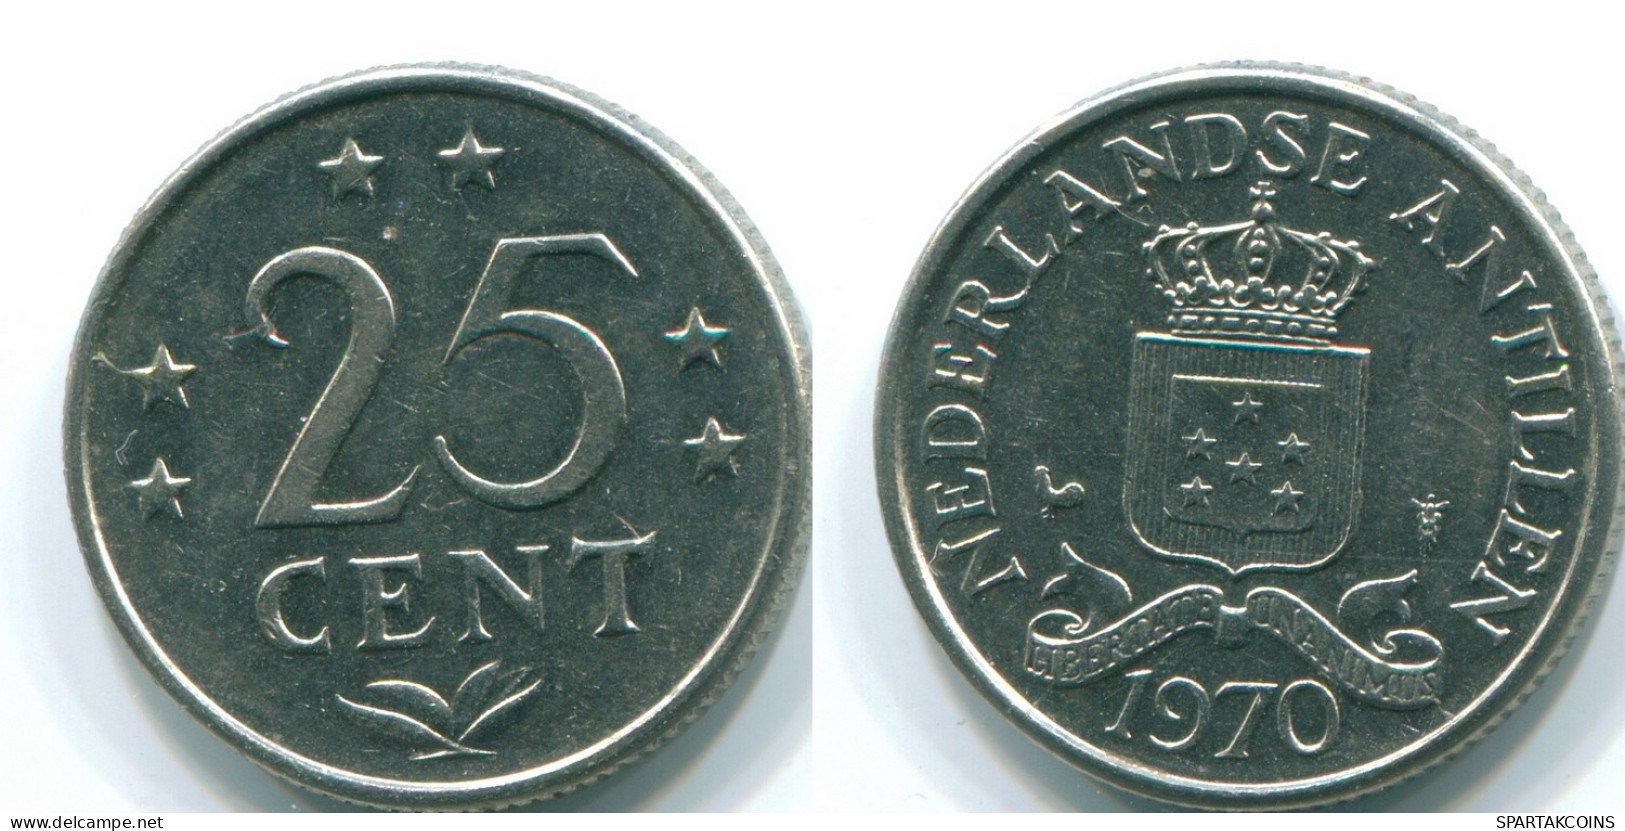 25 CENTS 1970 NETHERLANDS ANTILLES Nickel Colonial Coin #S11414.U.A - Netherlands Antilles